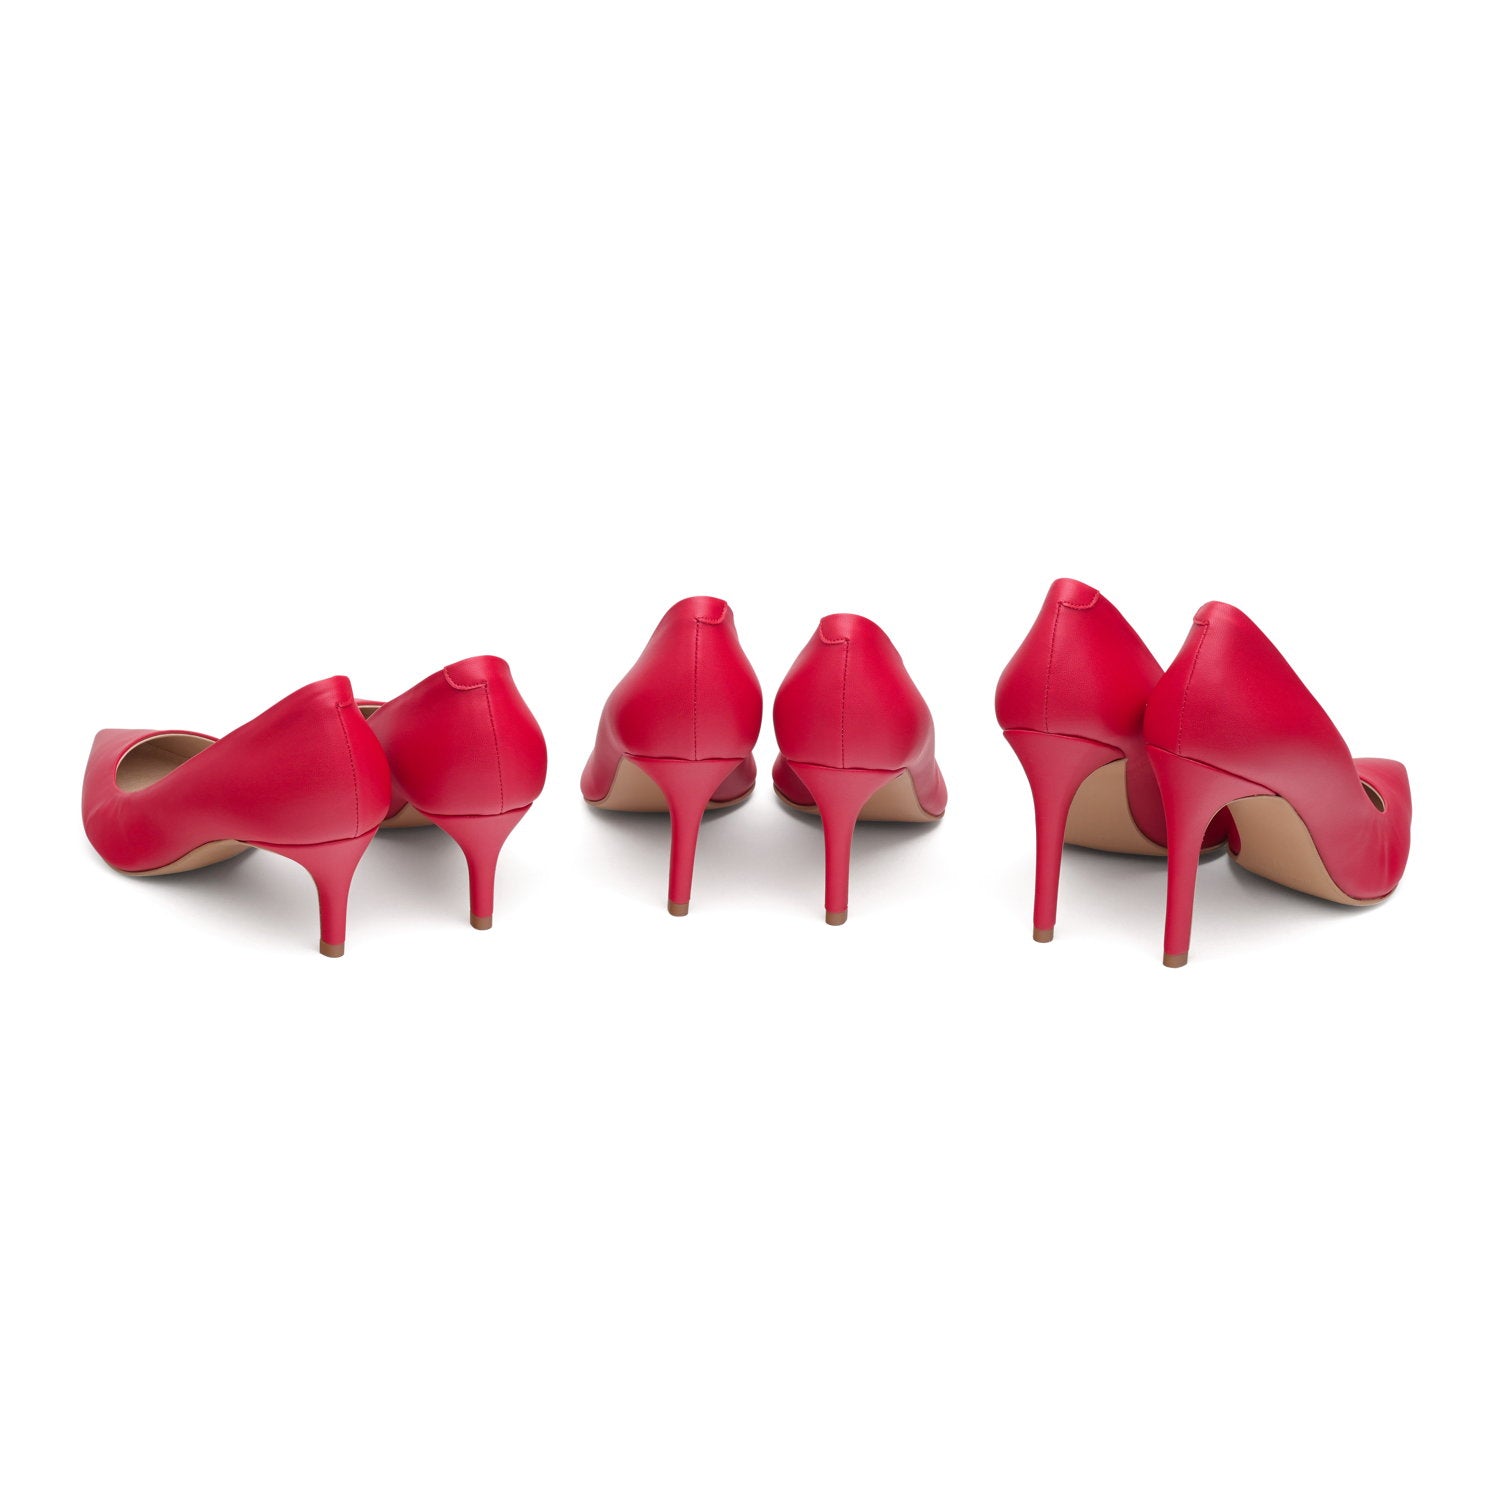 The Red – vegane 100mm Pumps